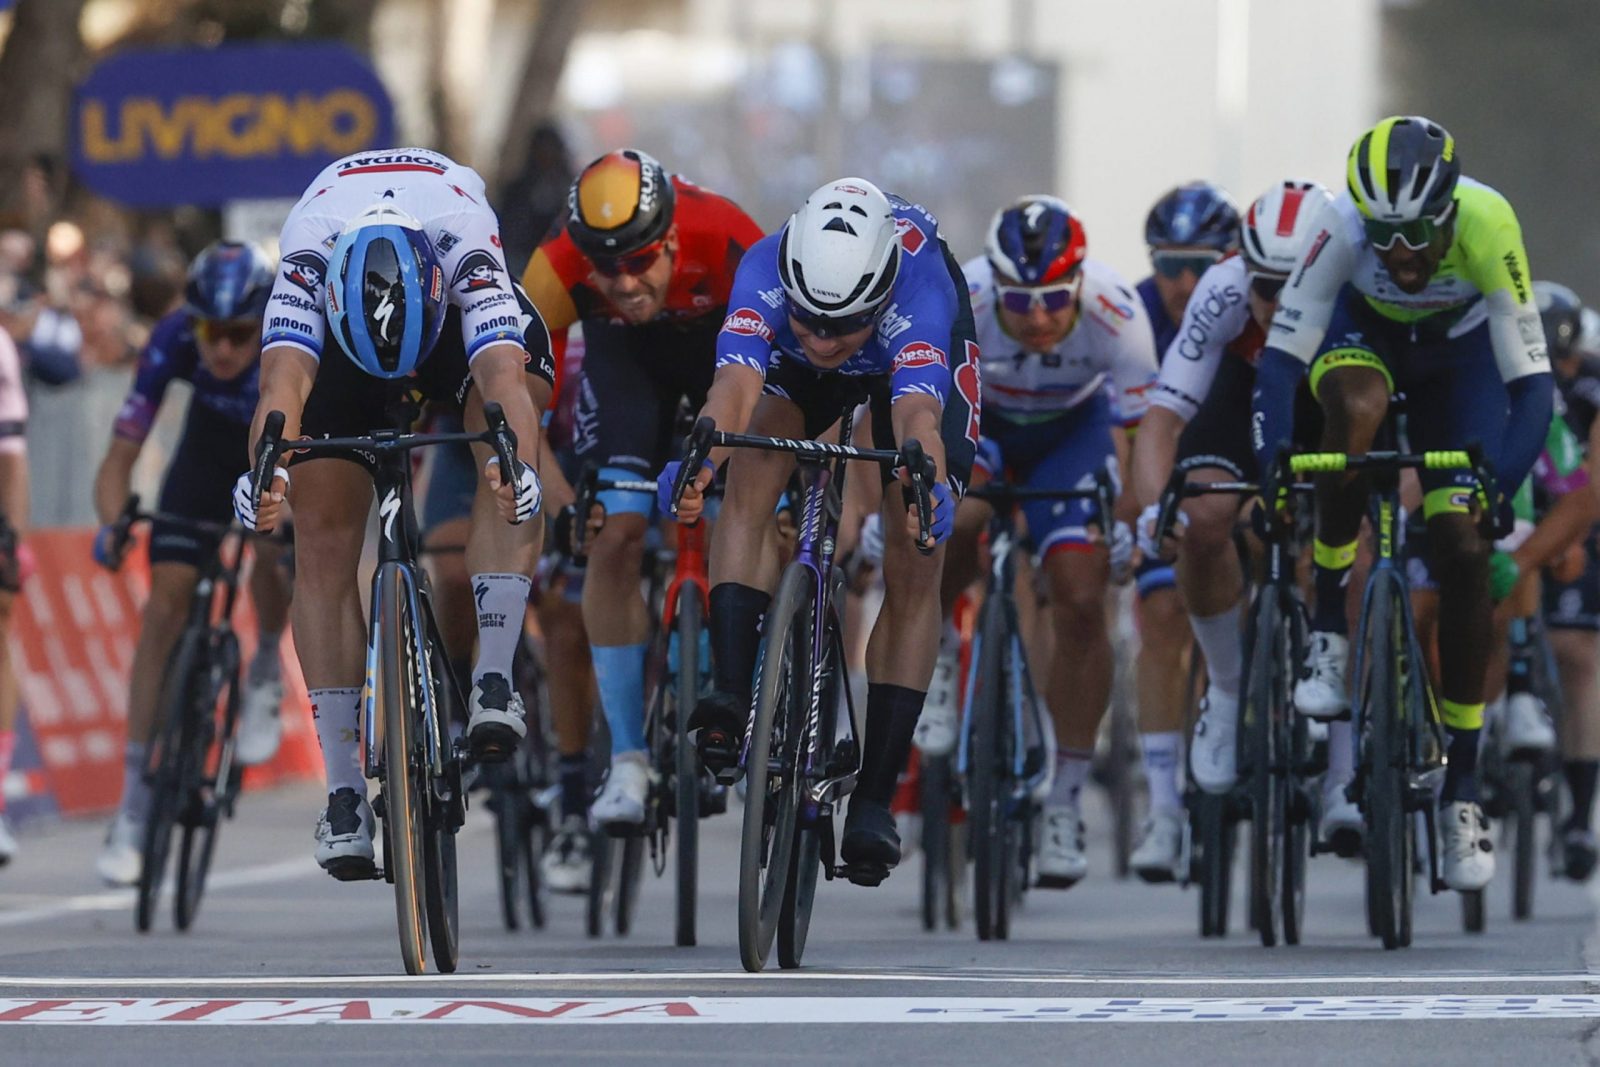 epa10507694 Fabio Jakobsen of team Soudal - Quick Step (L) wins ahead of Jasper Philipsen of the team Alpecin - Deceuninck the second stage of the 58th Tirreno Adriatico cycling race, from Camaiore to Follonica, in Follonica, Italy, 07 March 2023.  EPA/ROBERTO BETTINI